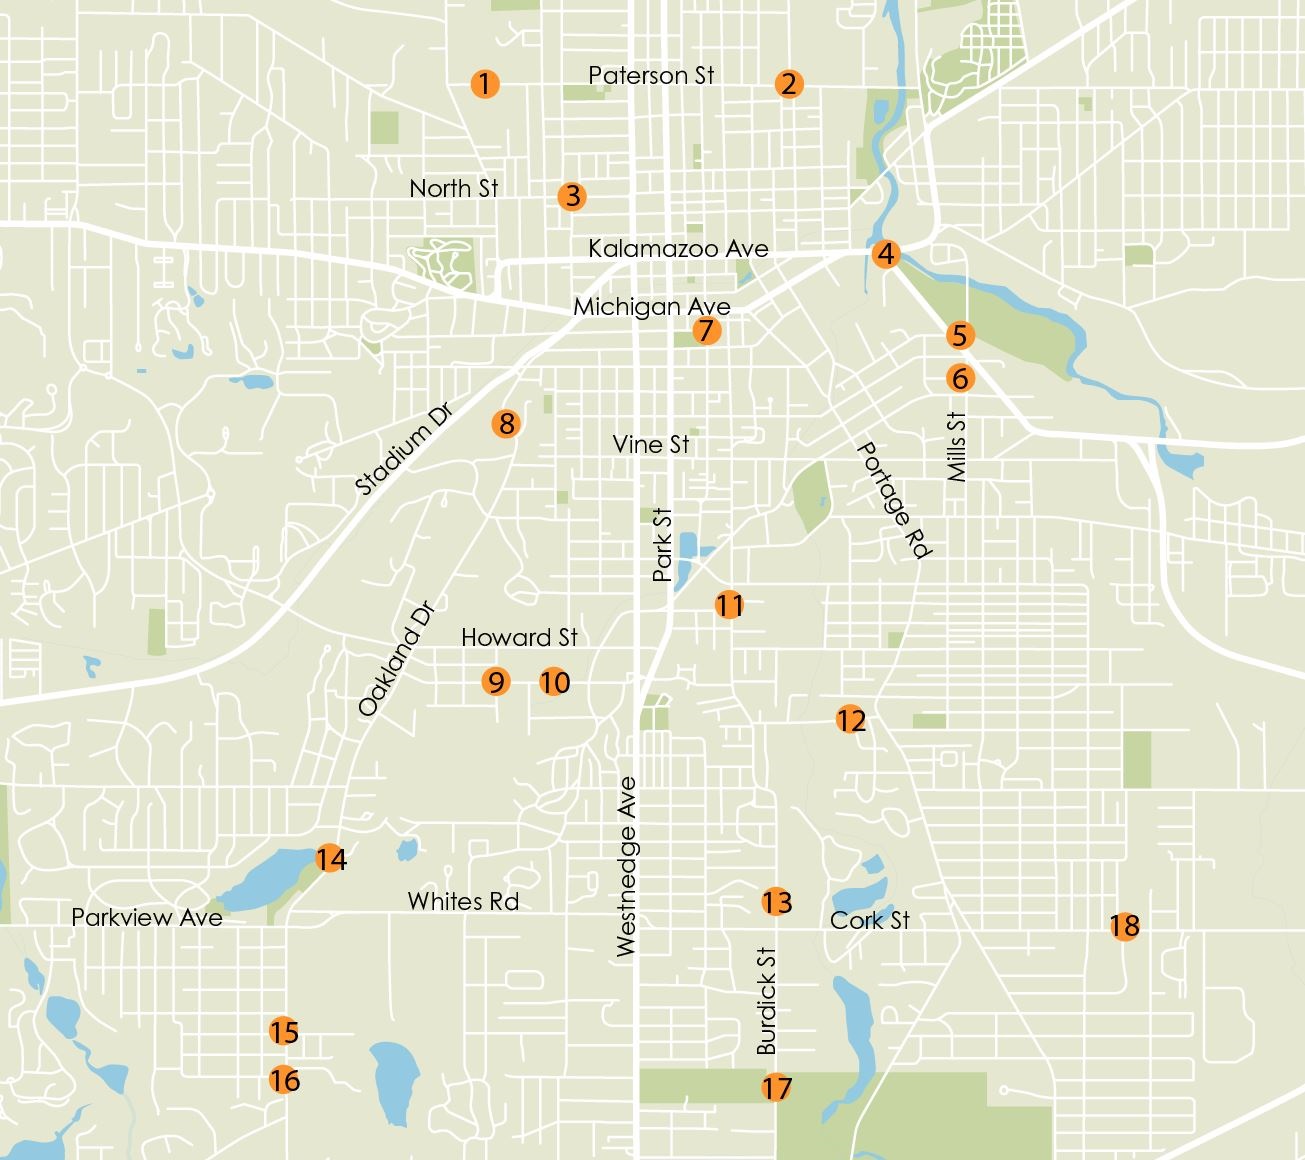 Map showing potential locations for pedestrian refuge islands